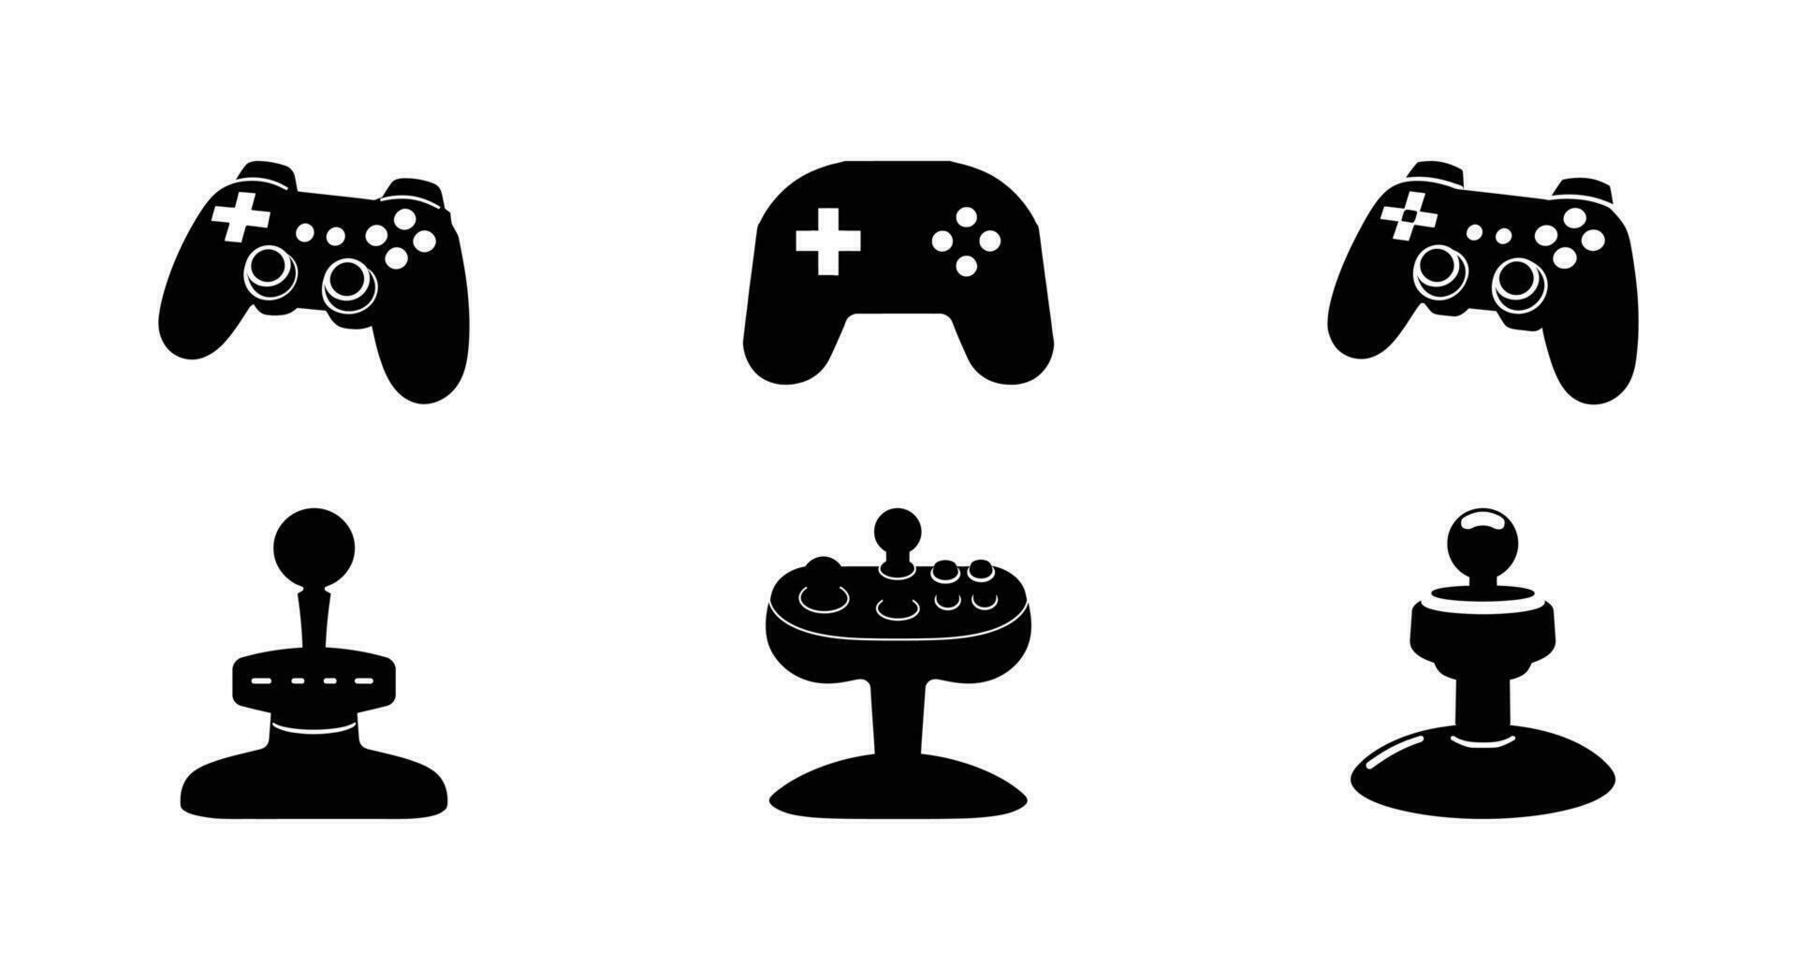 Game On Dynamic Vector Illustration of a Controller